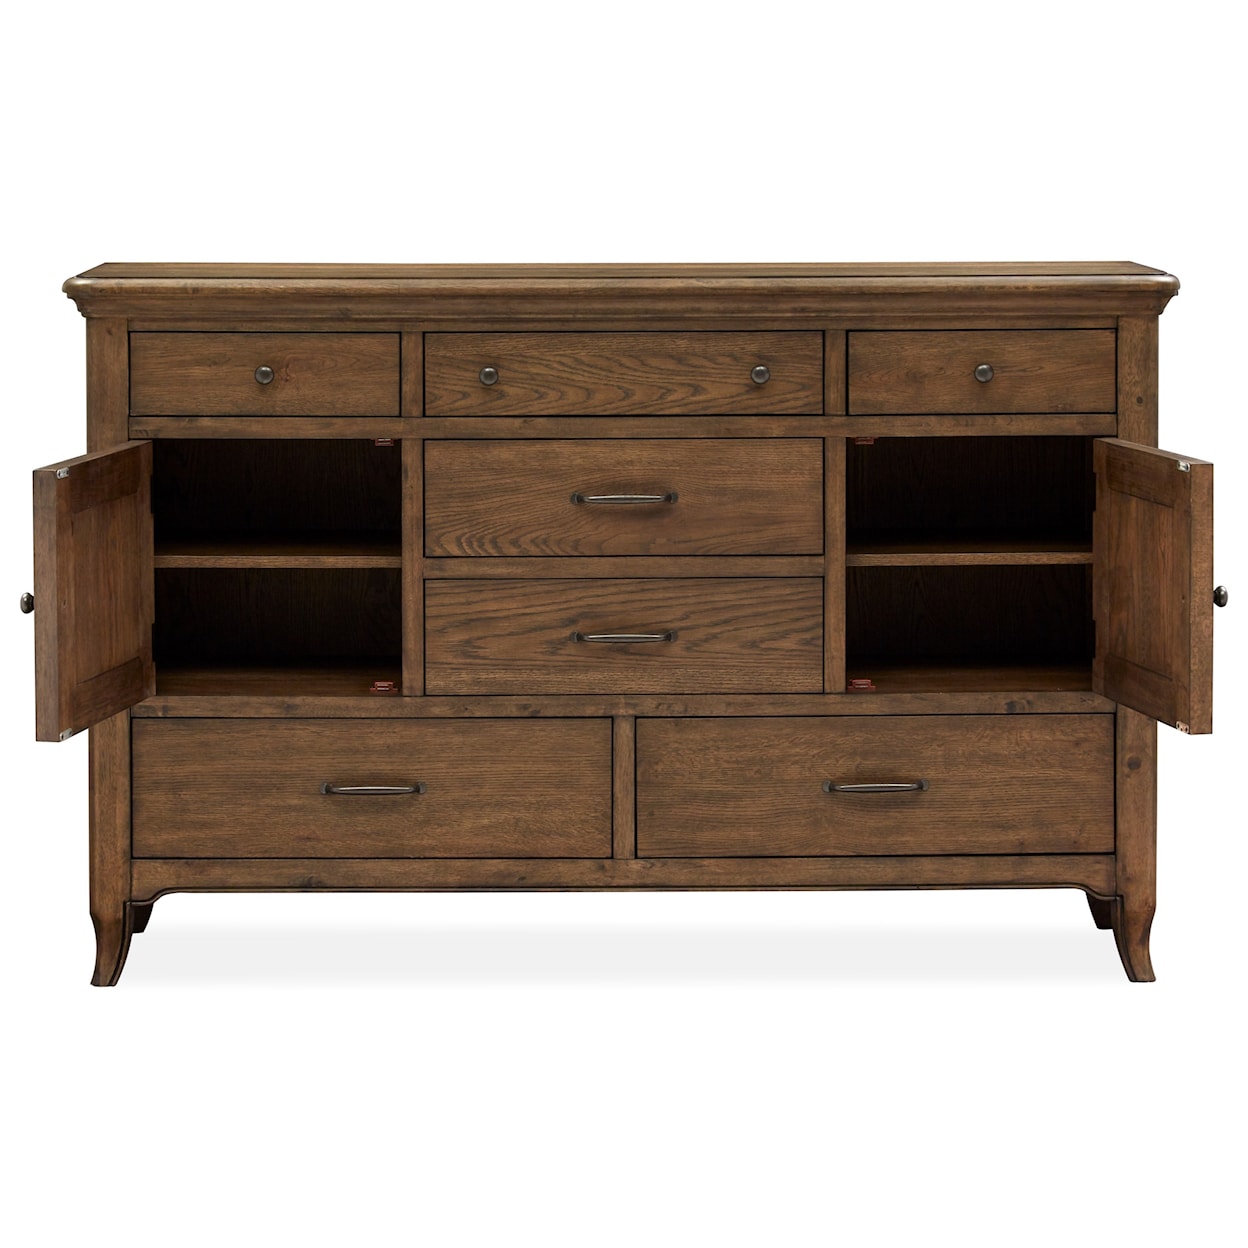 Belfort Select Withers Grove Dresser